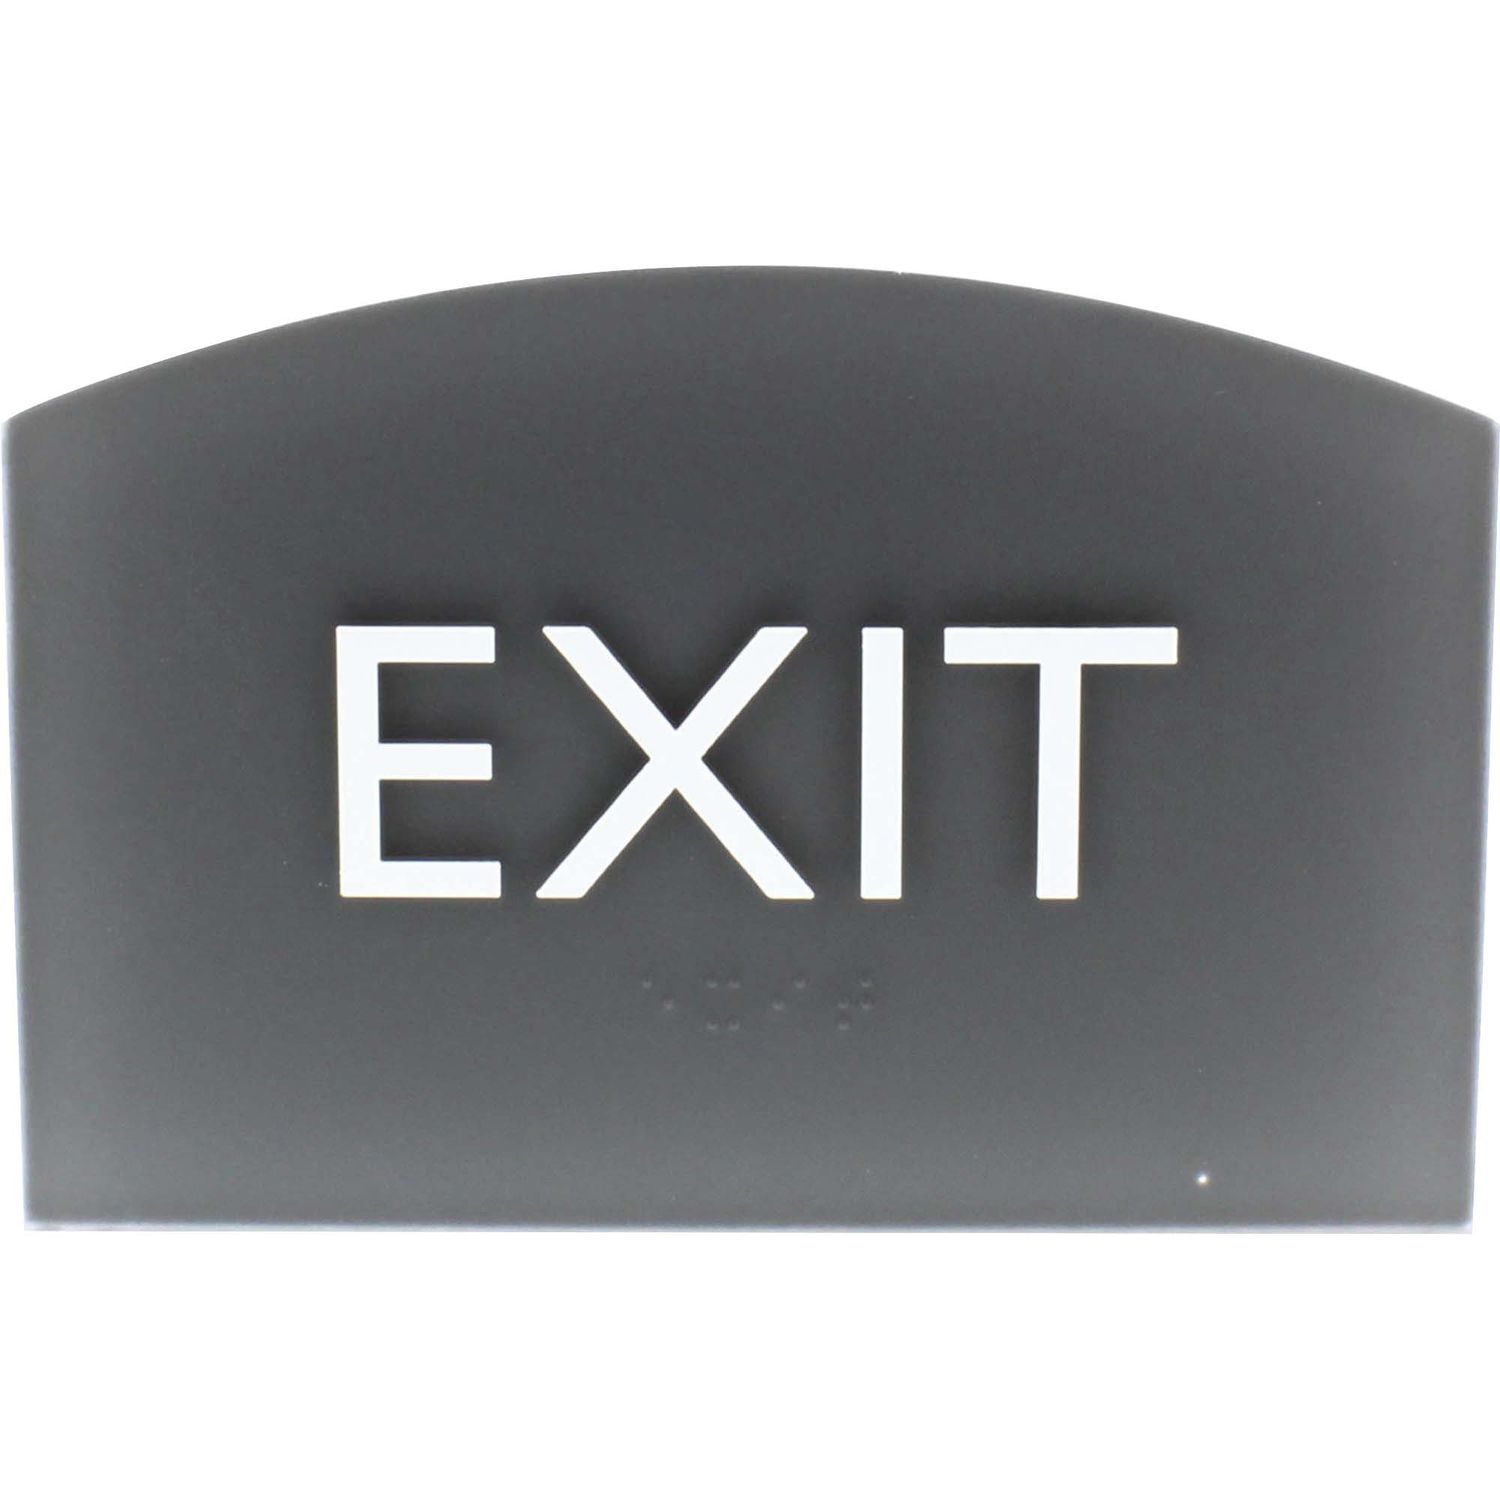 Exit Sign 1 Each, 4.5" Width x 6.8" Height, Easy Readability, Braille, Dark Gray